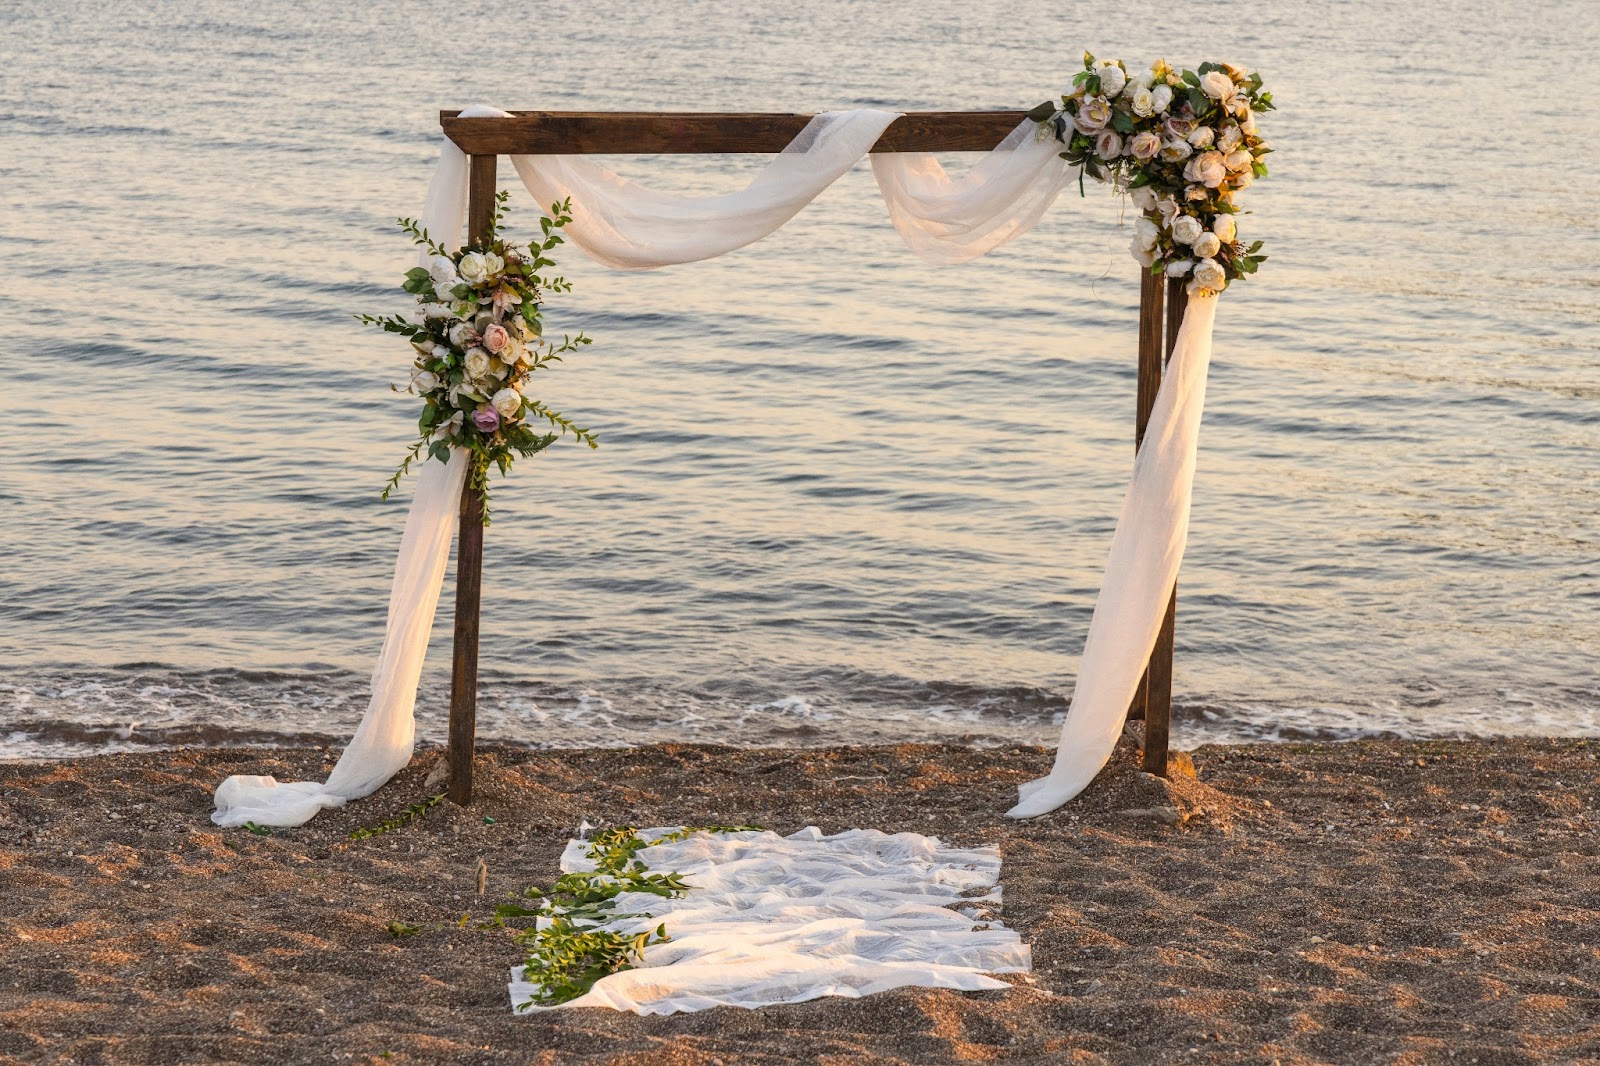 Romantic backdrop for a beautiful beach wedding in Cancun, showcasing the allure of a beach wedding in Mexico.